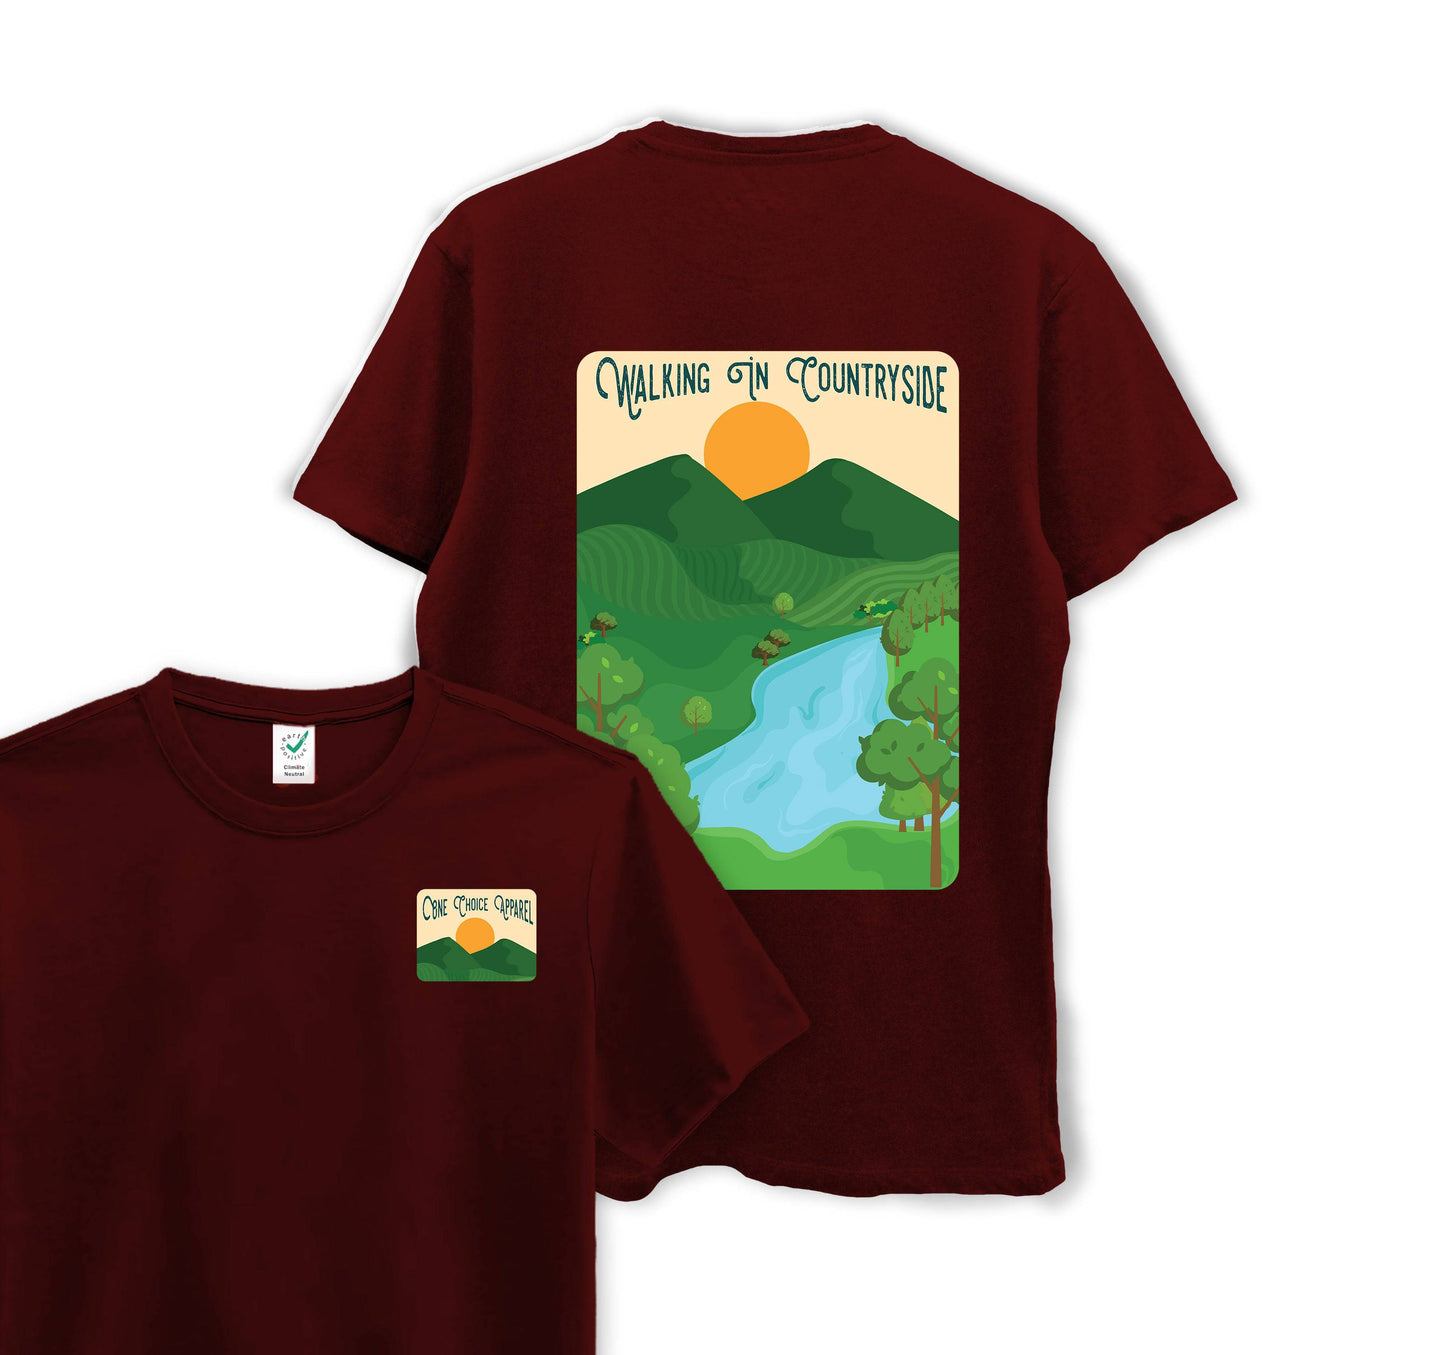 Walking In Countryside - Organic Cotton Tee - One Choice Apparel